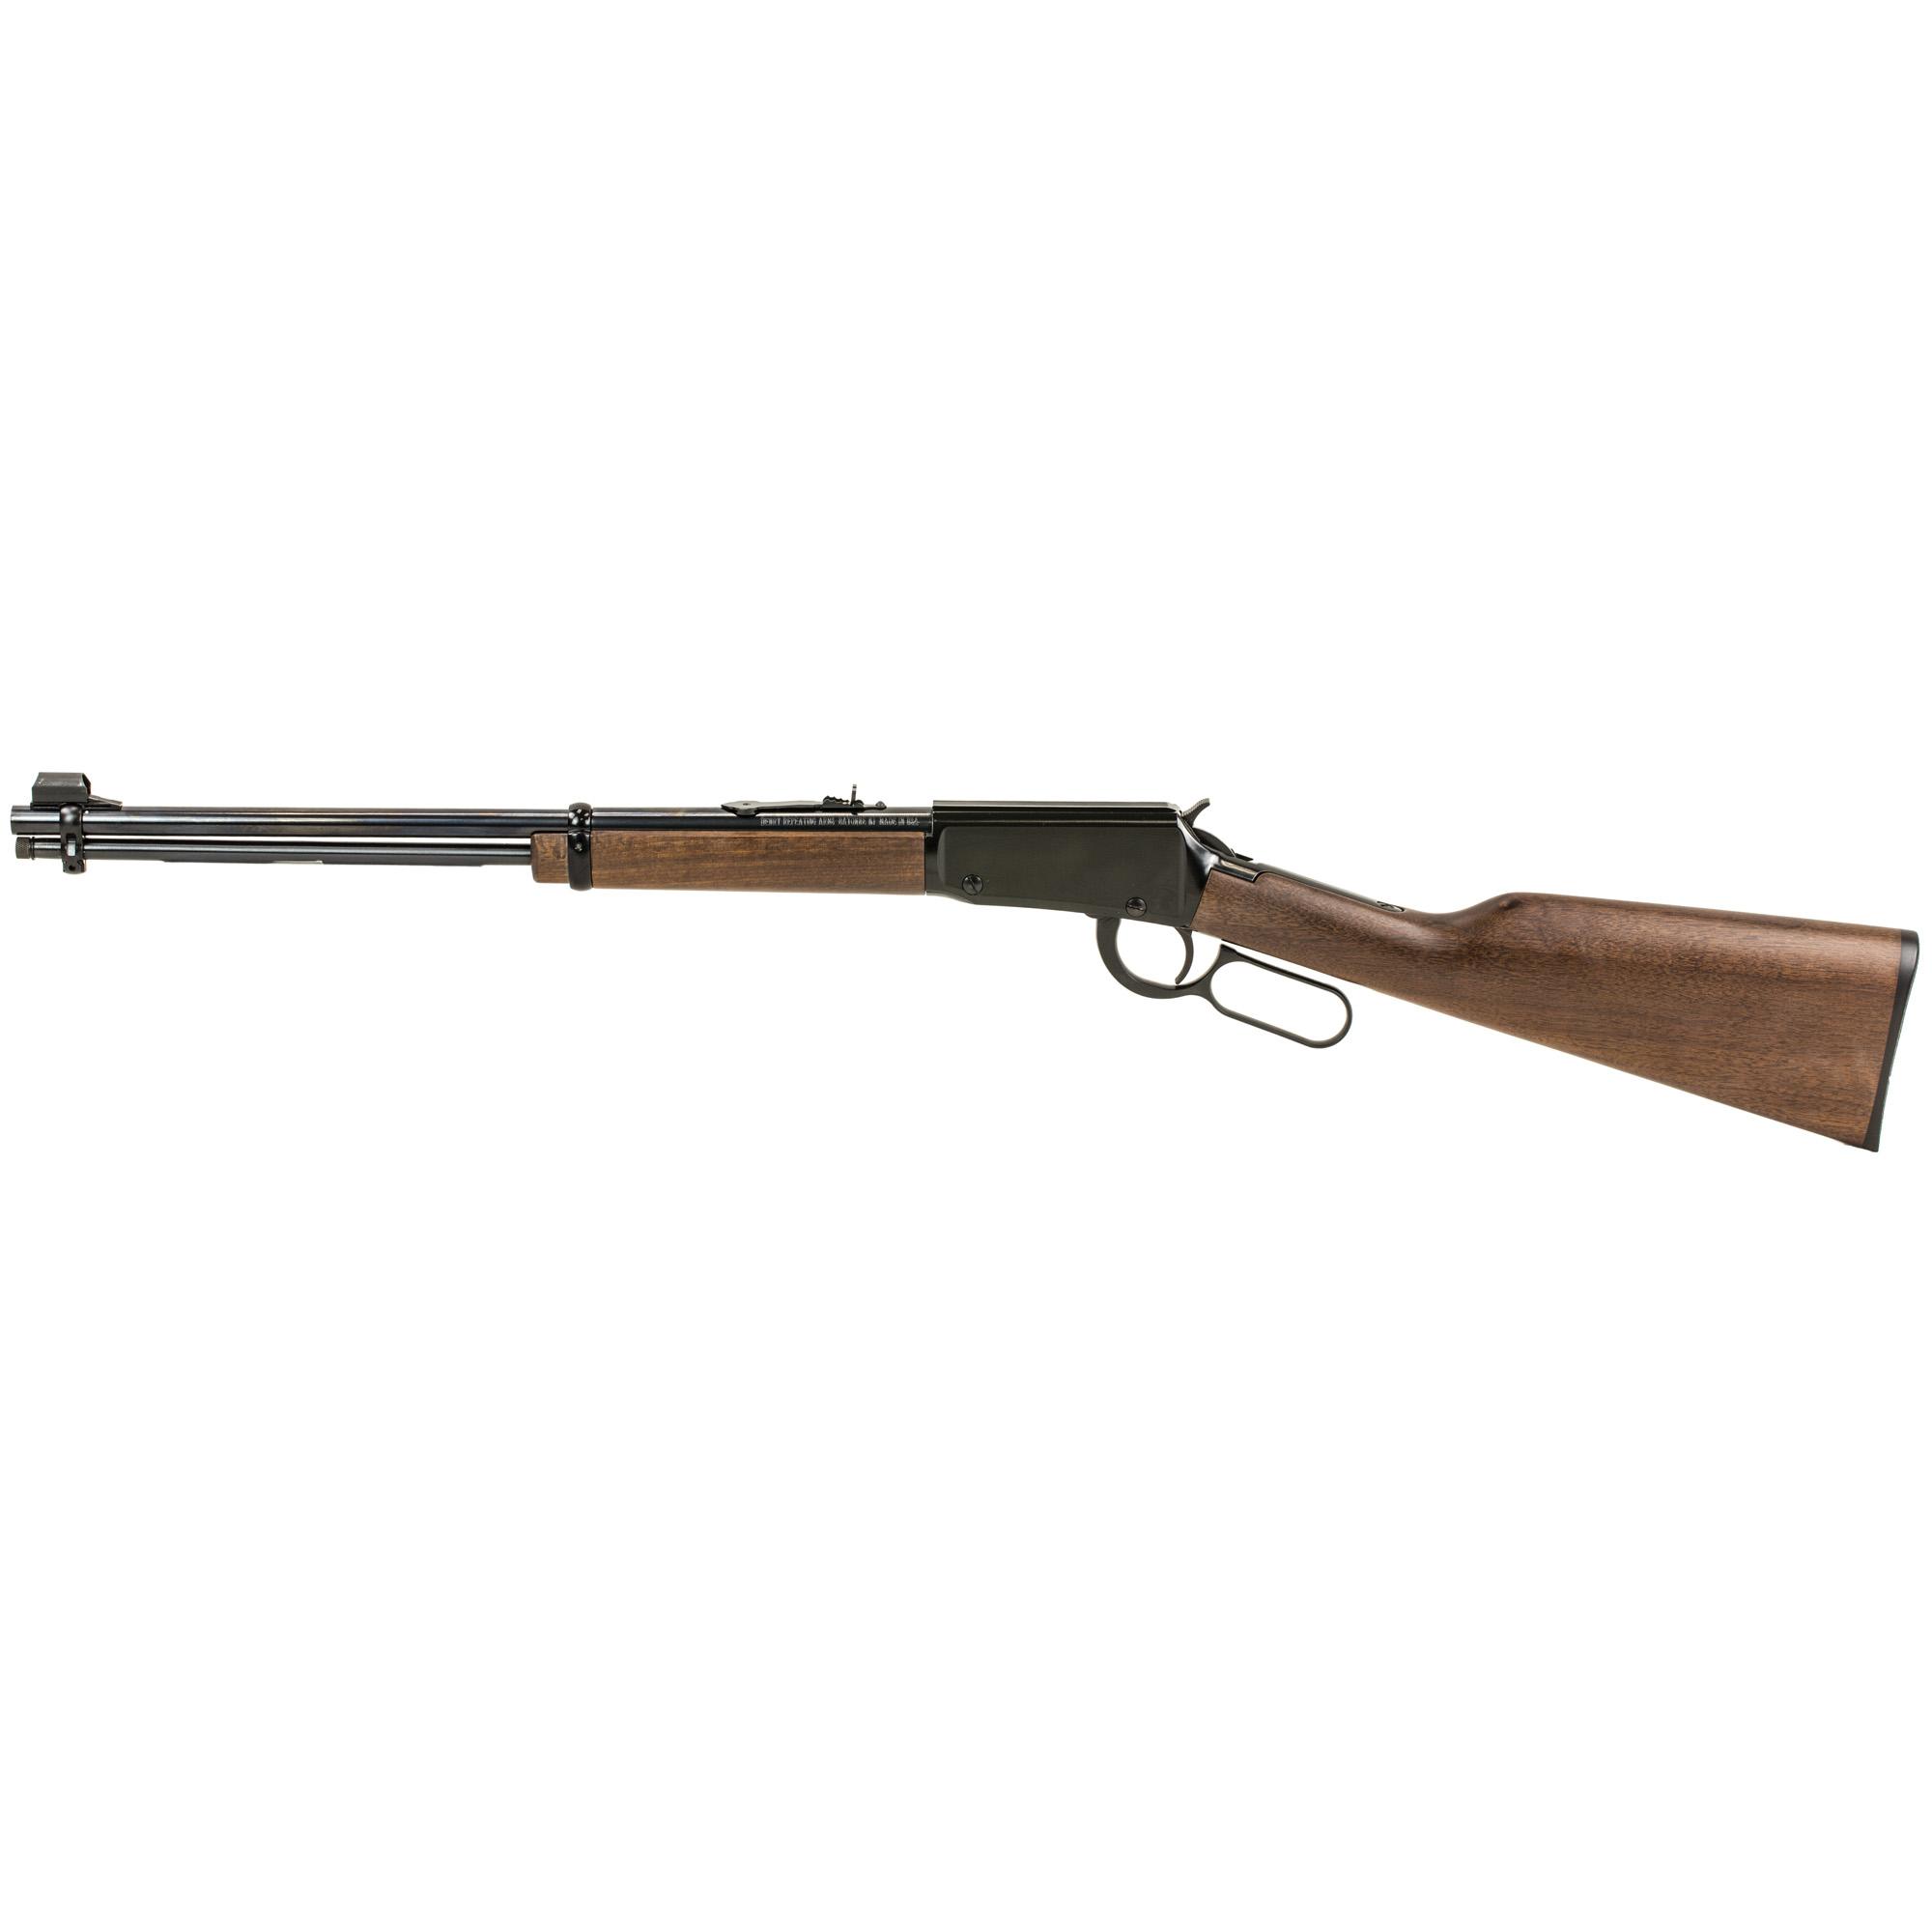 Henry Repeating Arms, Lever Action, 22LR, 18.25" Barrel, NEW